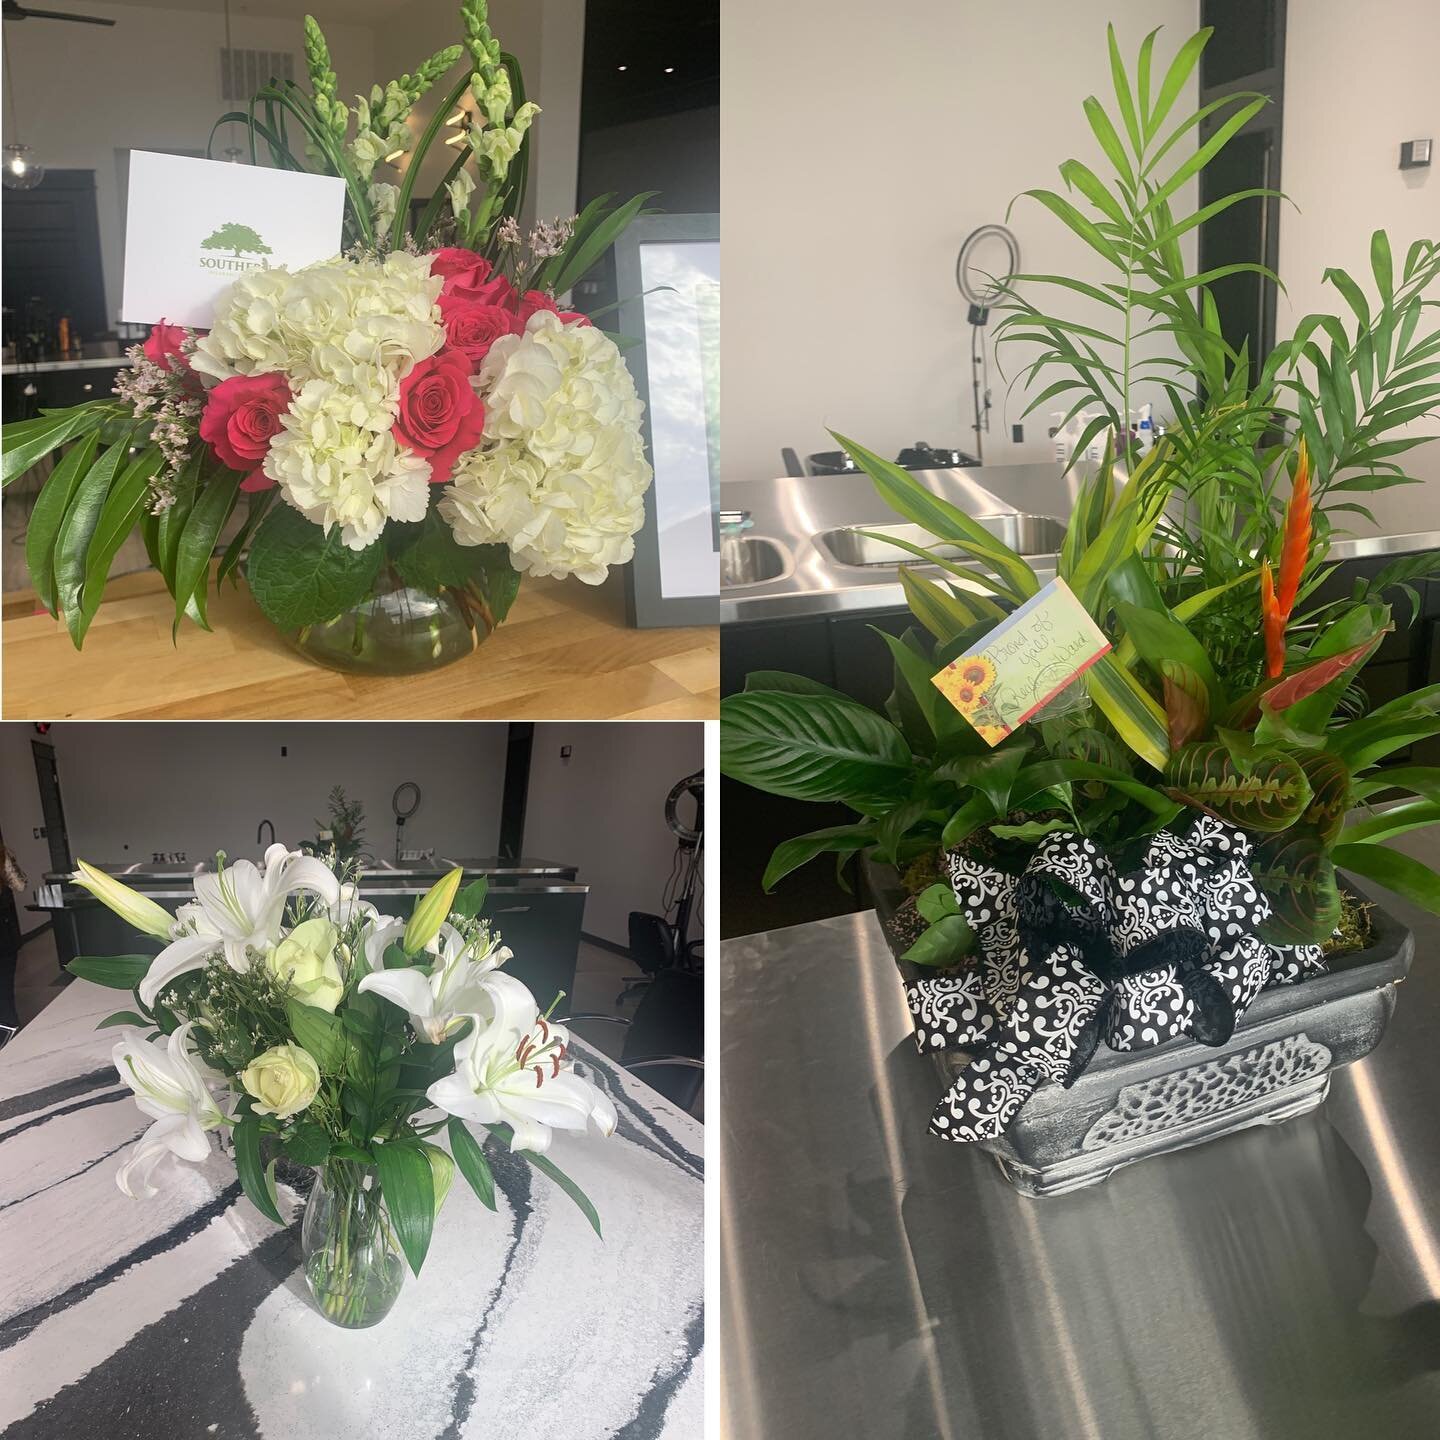 Just want to say thank you to our sweet friends for these beautiful arrangements!